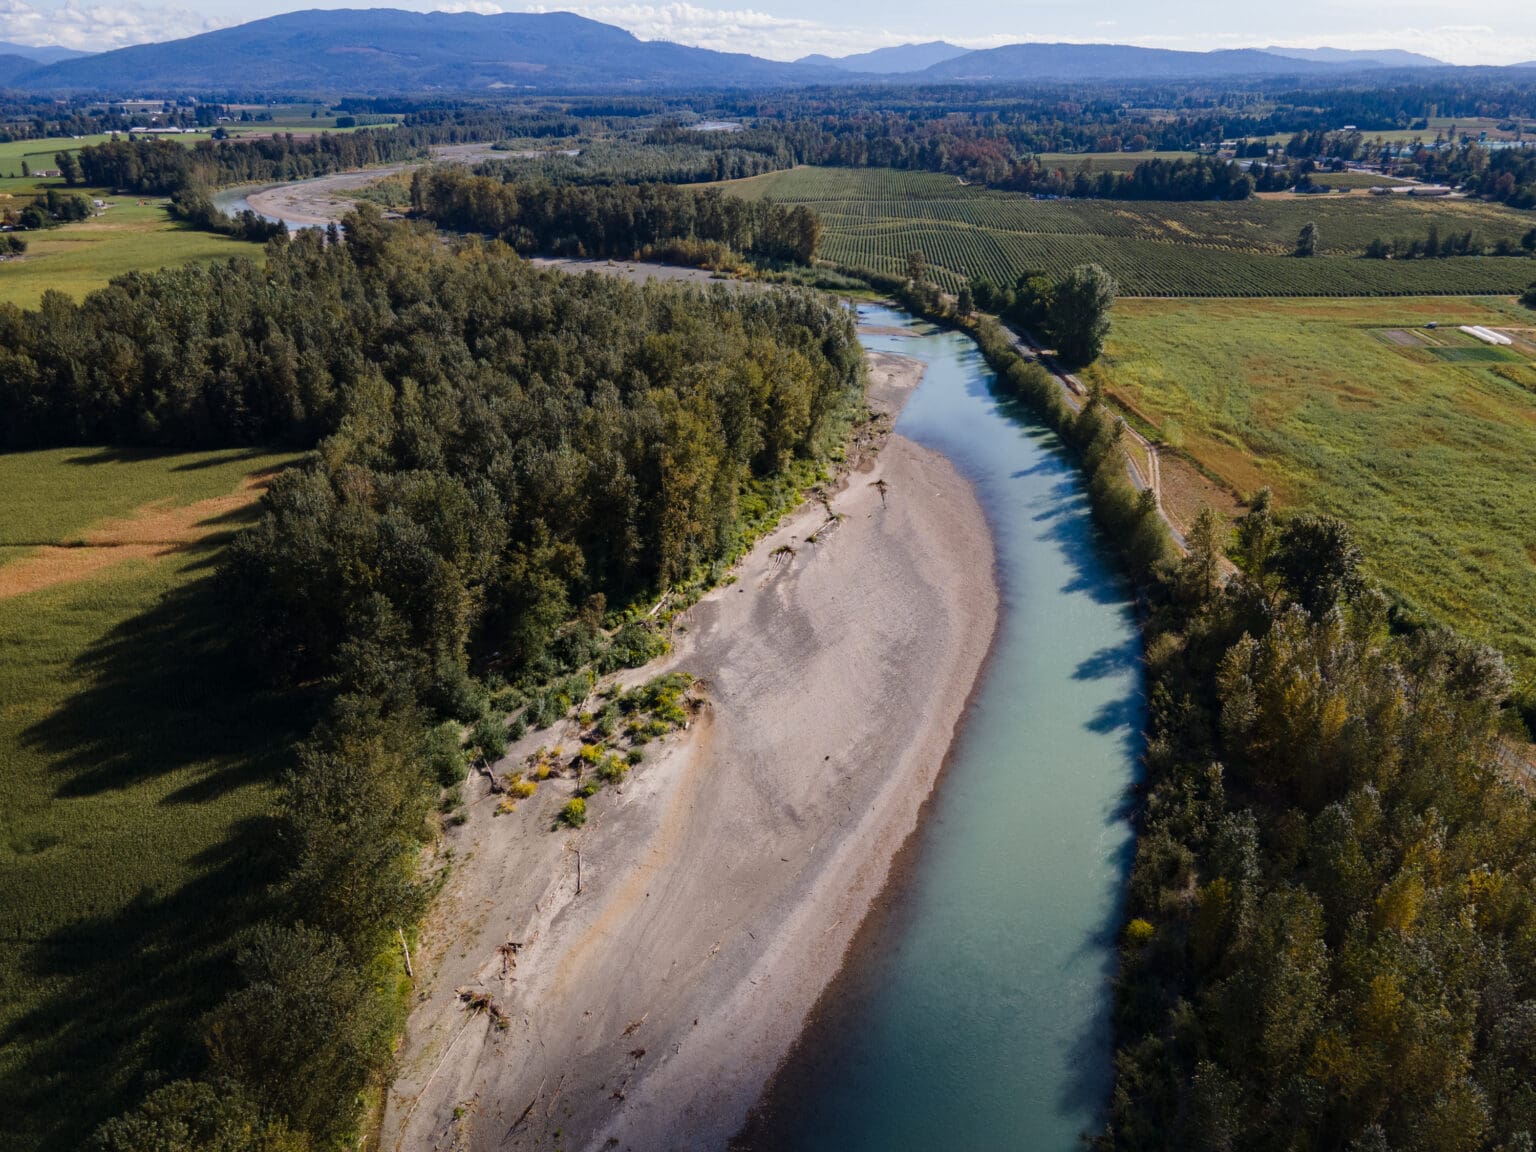 An aerial view of the Nooksack river running in between forests and flat farm lands.